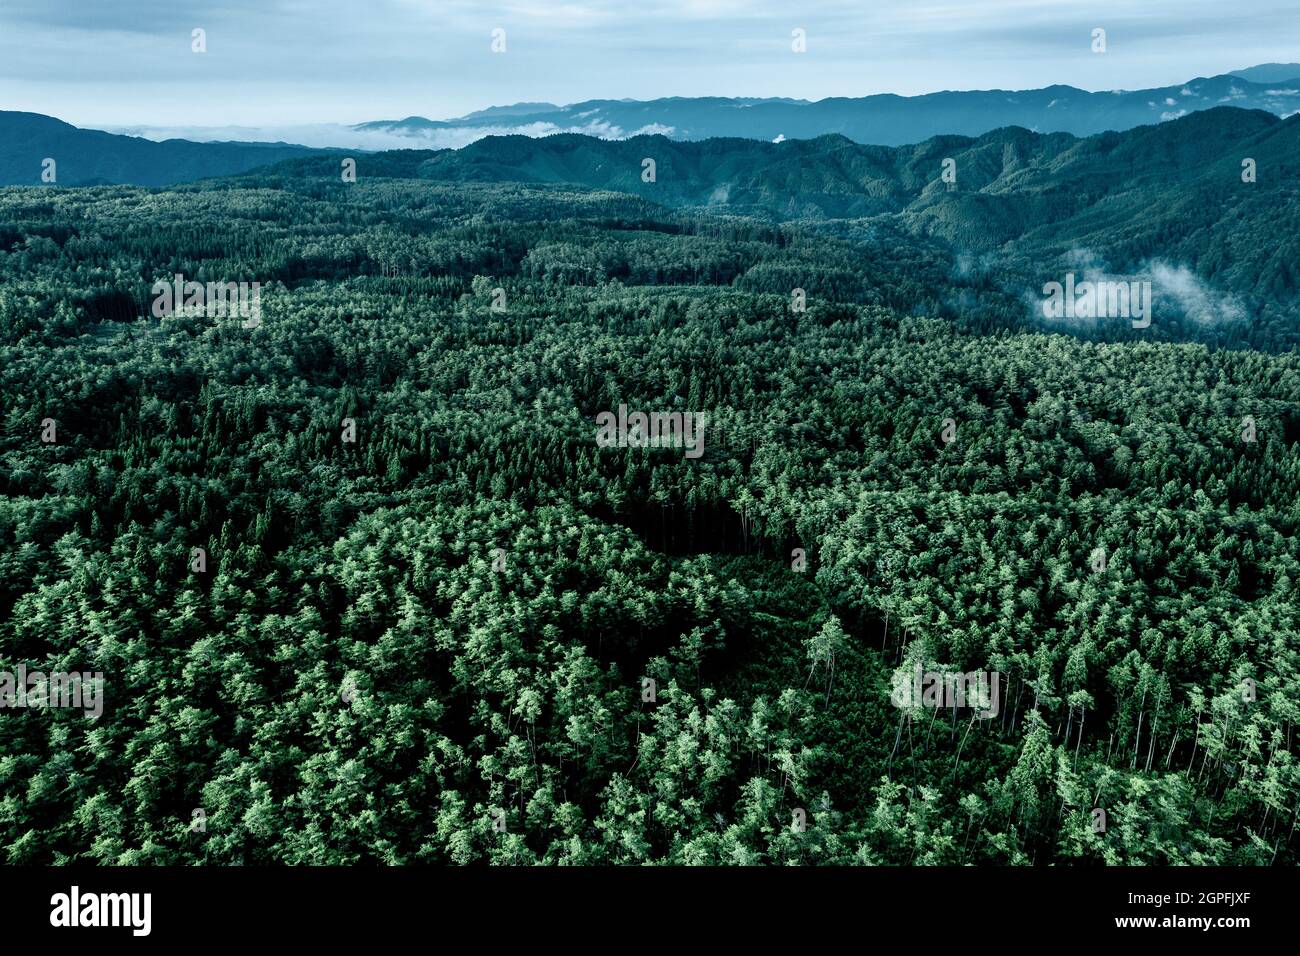 Aerial image of forested mountains in Japan Stock Photo